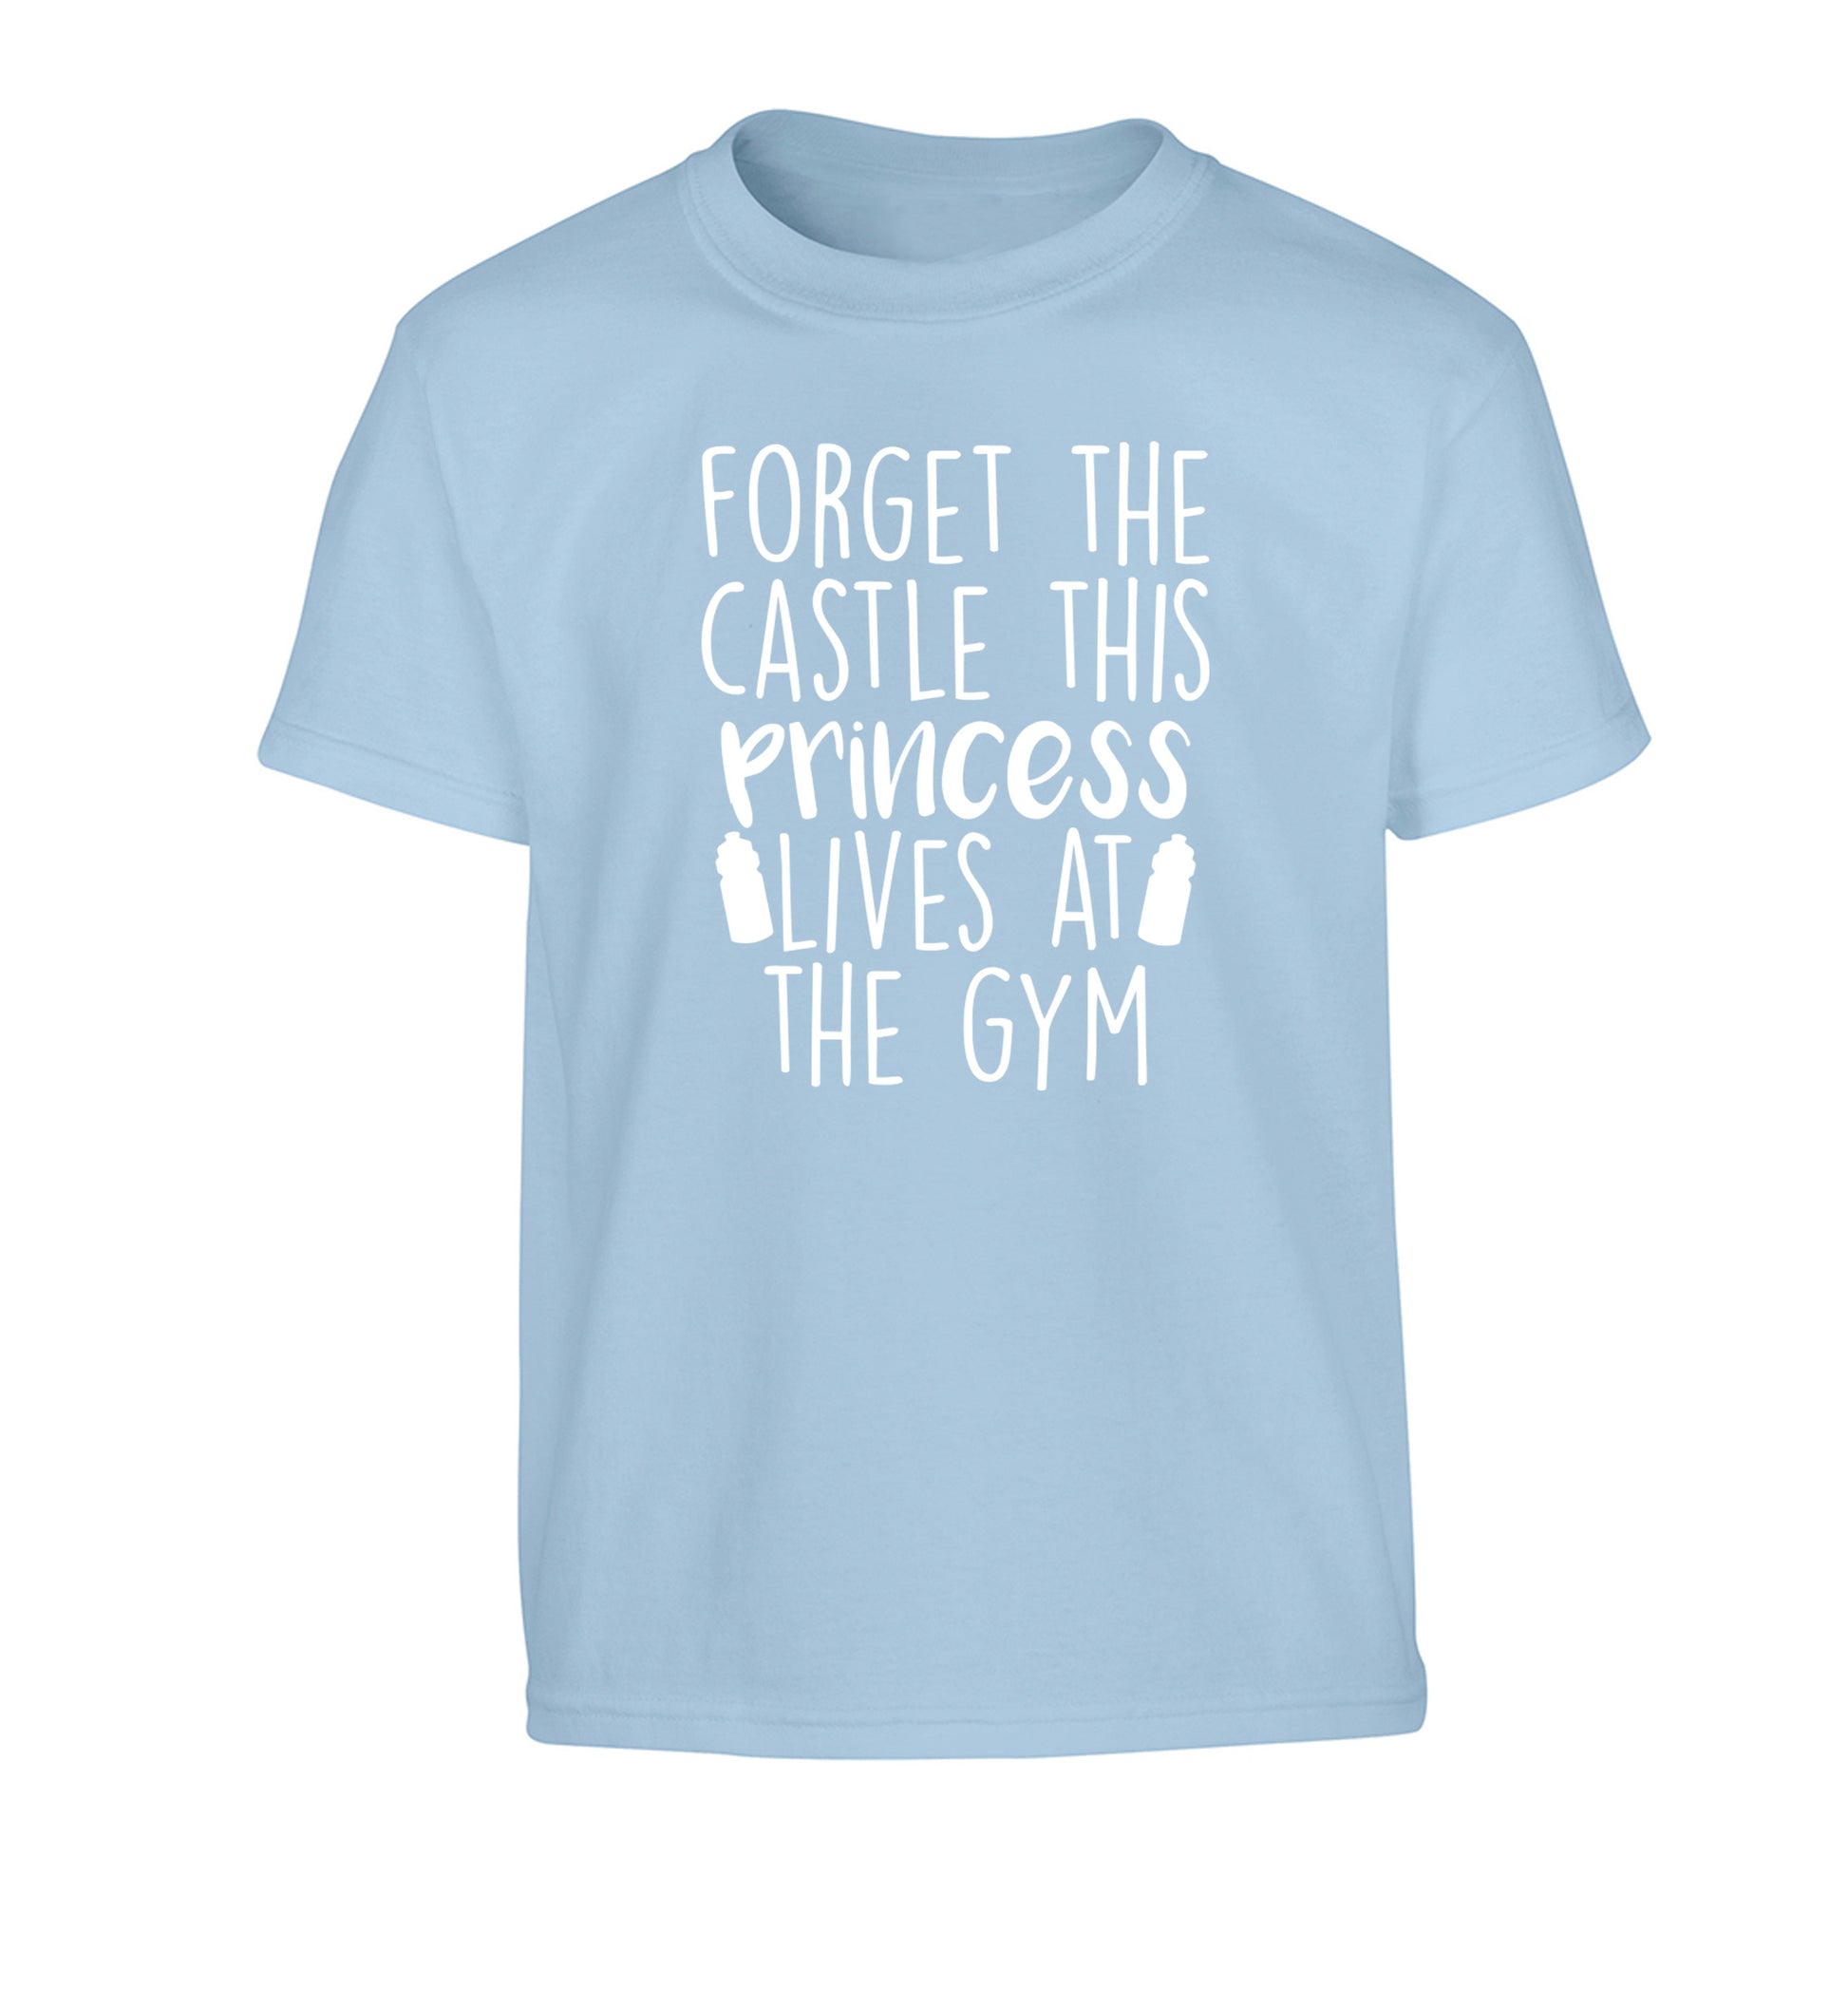 Forget the castle this princess lives at the gym Children's light blue Tshirt 12-14 Years